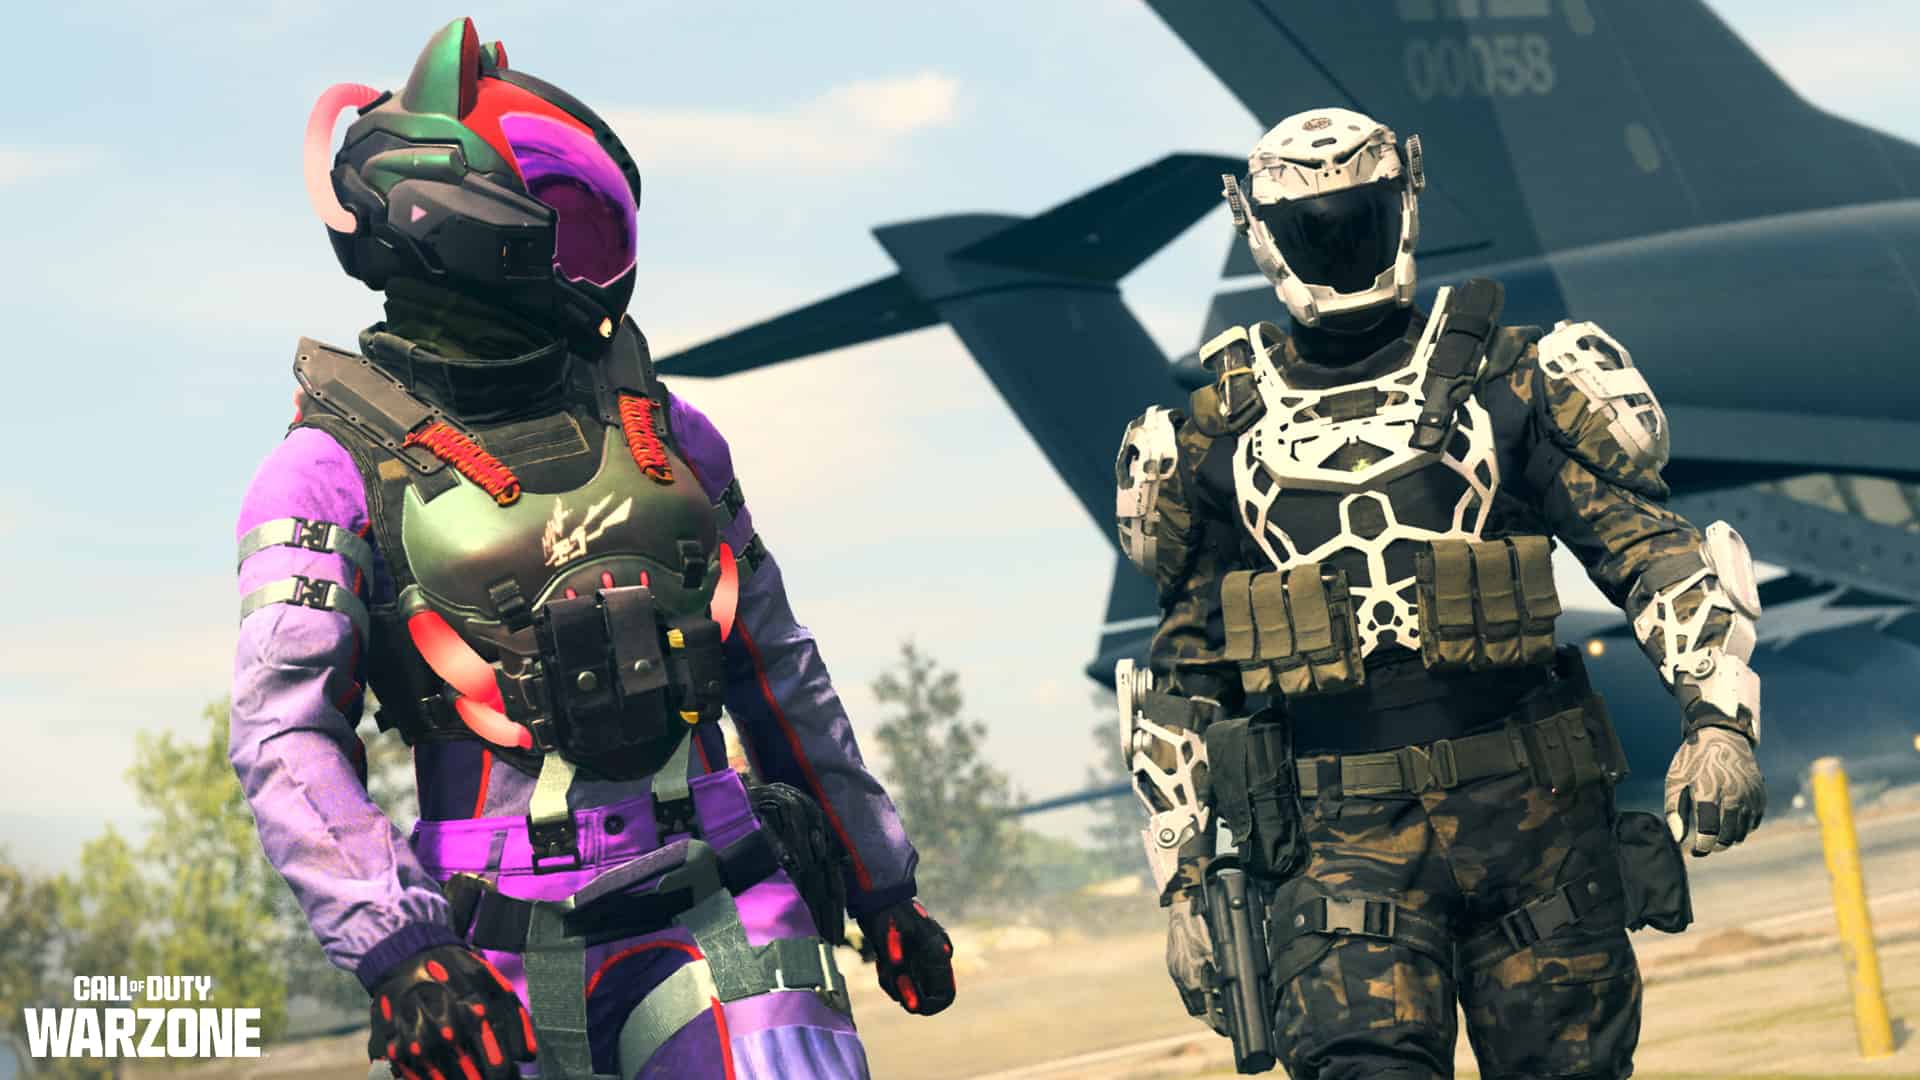 Two armored individuals standing next to a plane, possibly related to MW3 Ranked Play rewards.